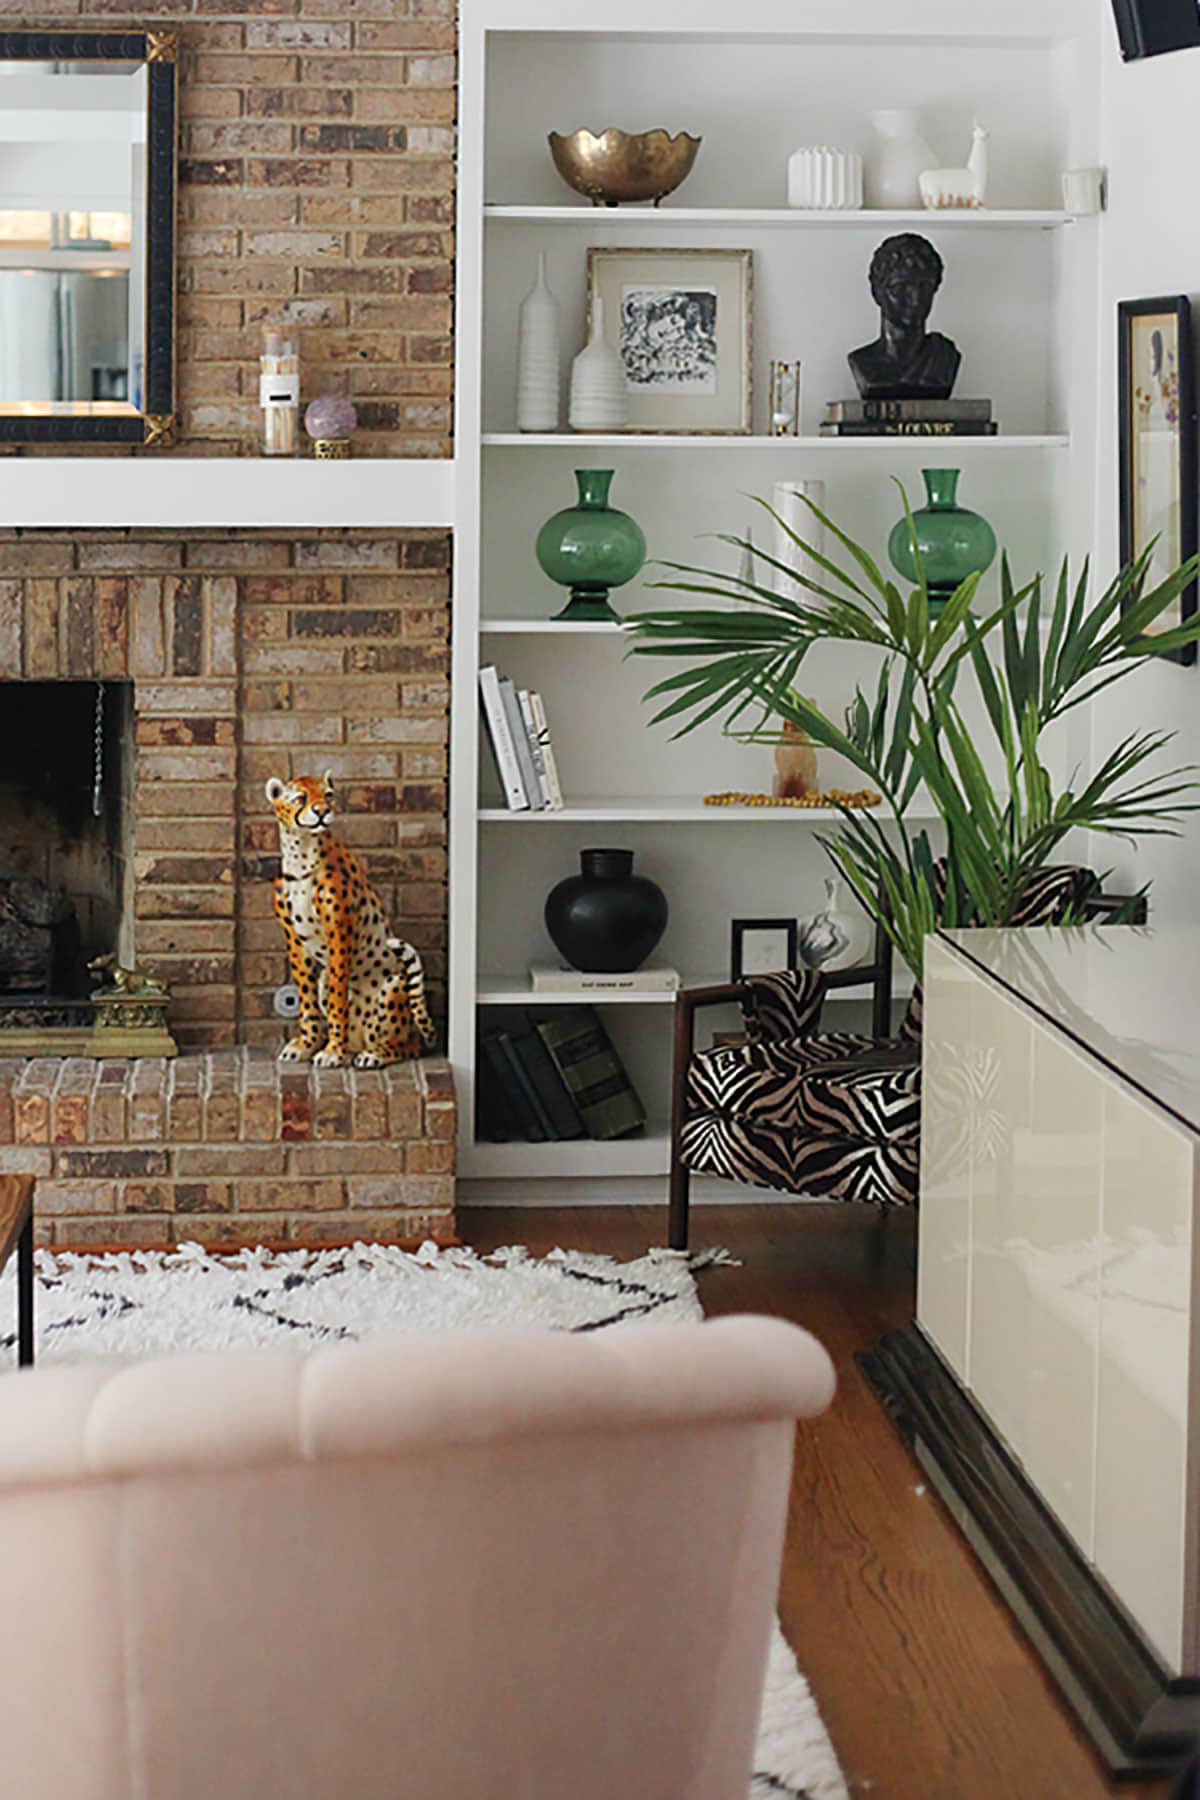 No Makeup Home Tour hosted by House of Hipsters — what a blogger's home looks like in real life.